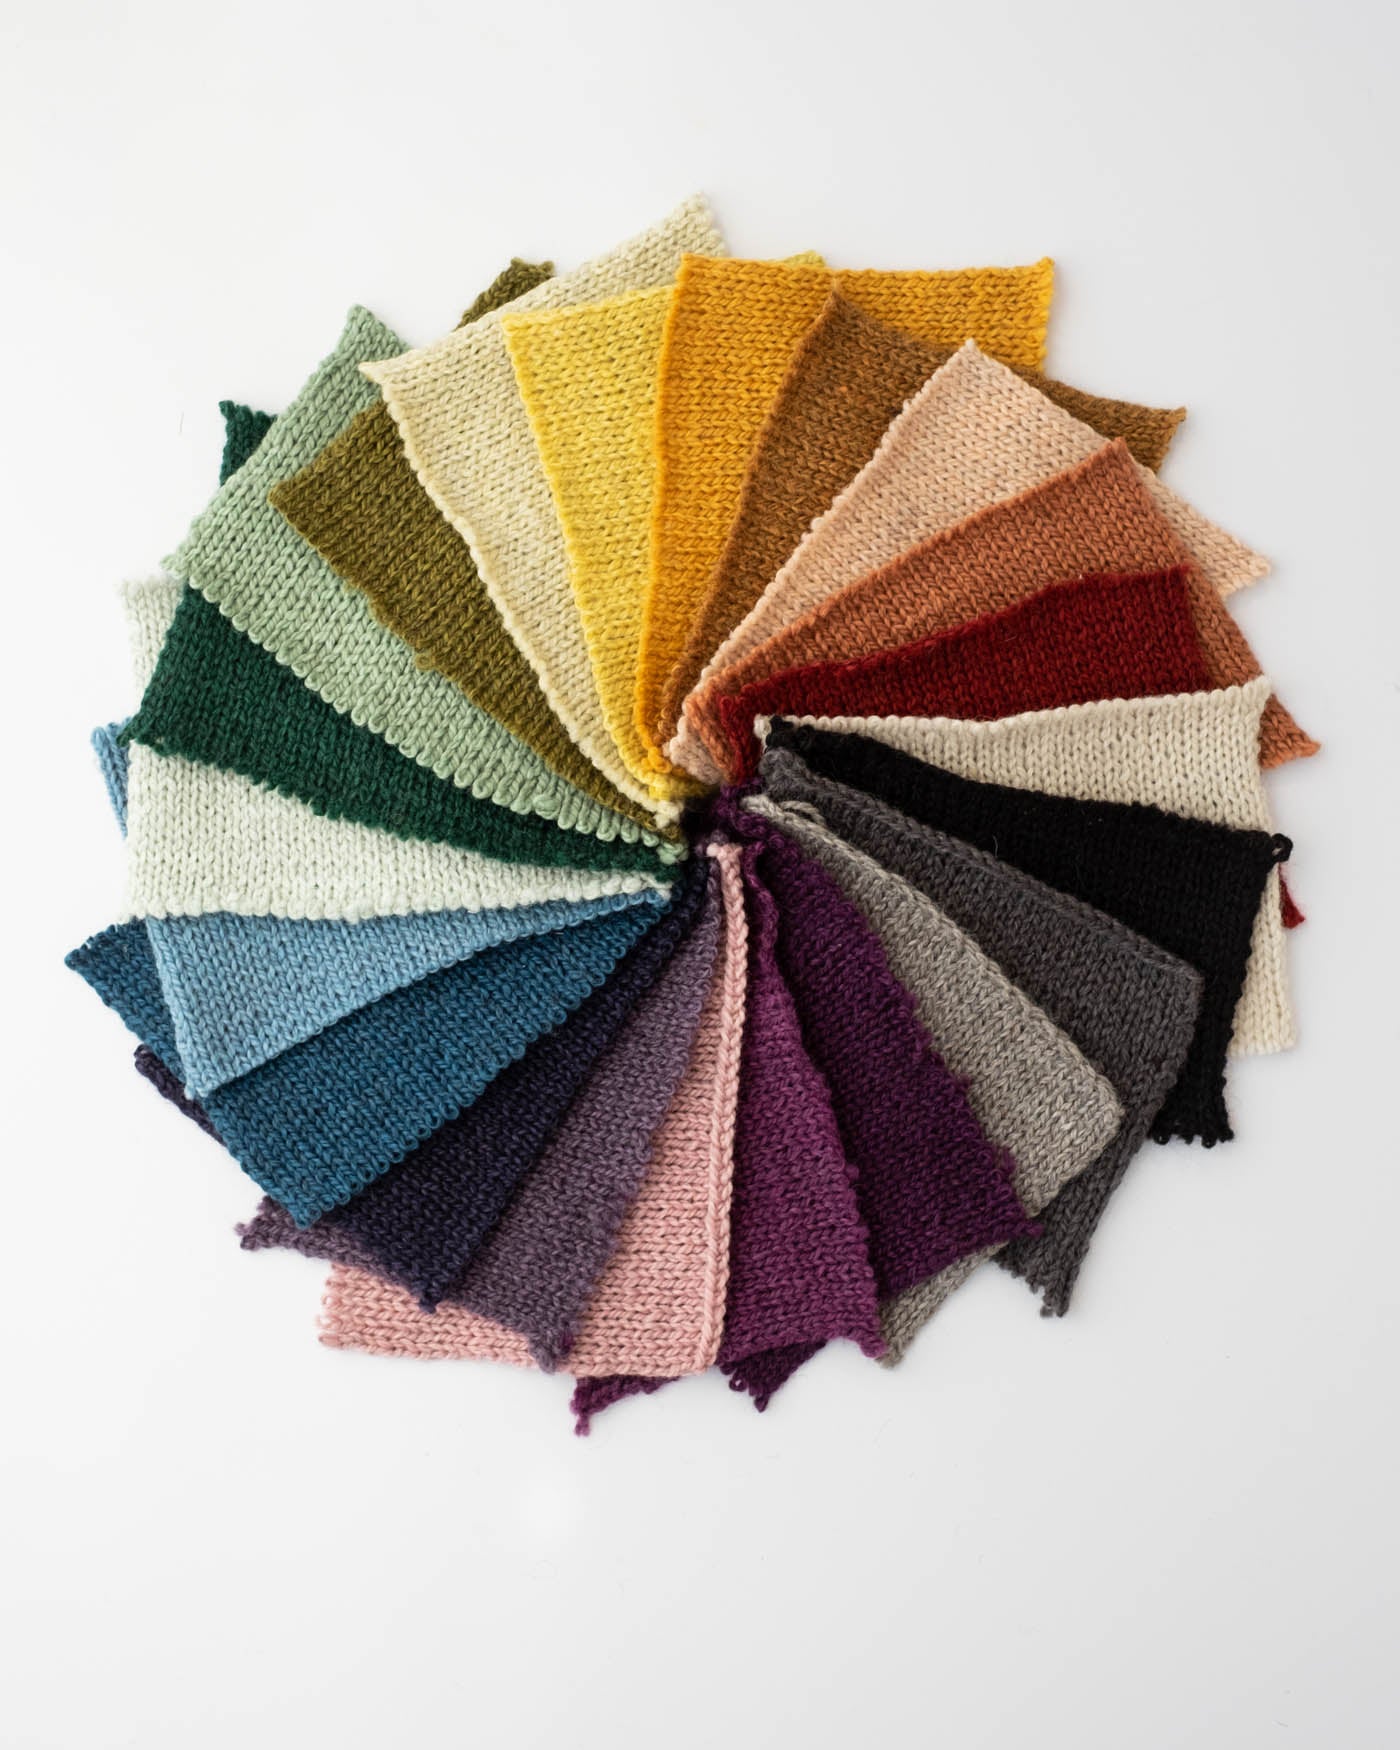 Rectangular knit swatches in the color of the rainbow in a circle to show all 22 colors.